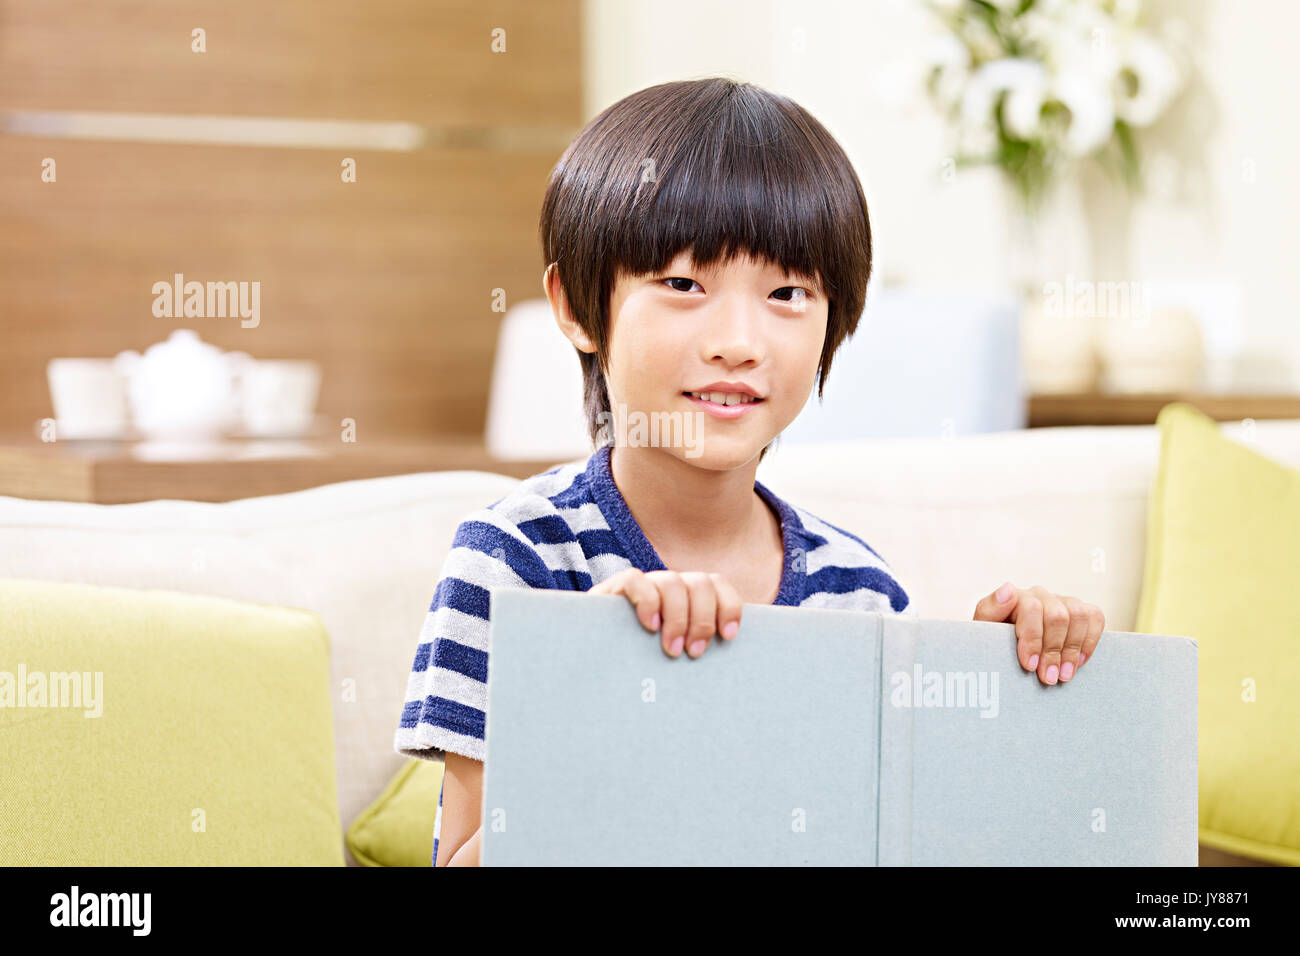 portrait of an asian little boy sitting on couch at home holding a book looking at camera smiling. Stock Photo